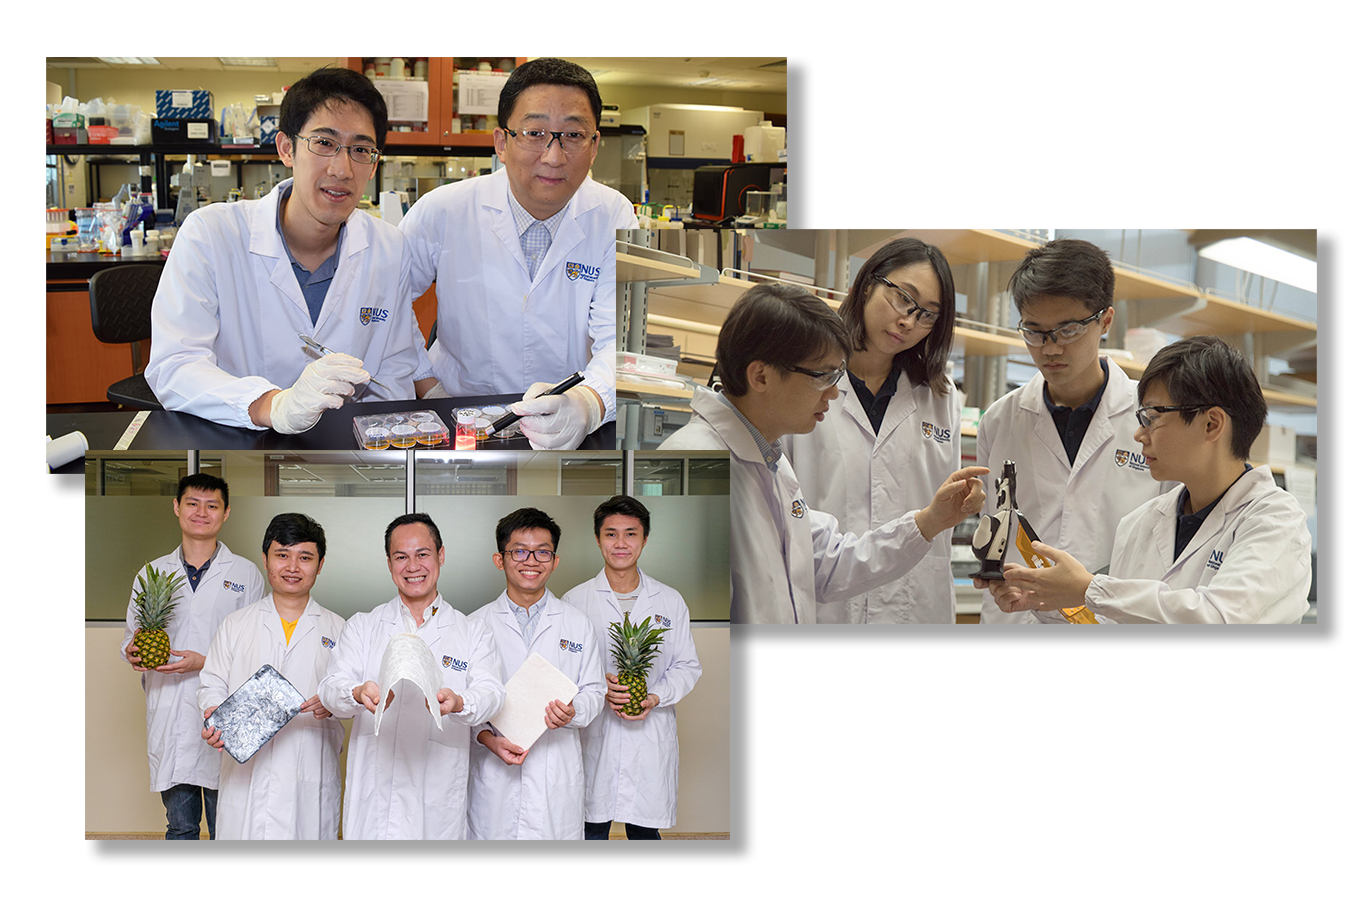 <div>Top left: Assistant Professor John Ho and Professor Zhang Yong, the phototherapy team. Right: Assistant Professor Benjamin Tee and the ACES team. Bottom left: Associate Professor</div><div> Duong Hai Minh and the aerogel team. (Not pictured: The Freezing of Gait Detection team)</div>